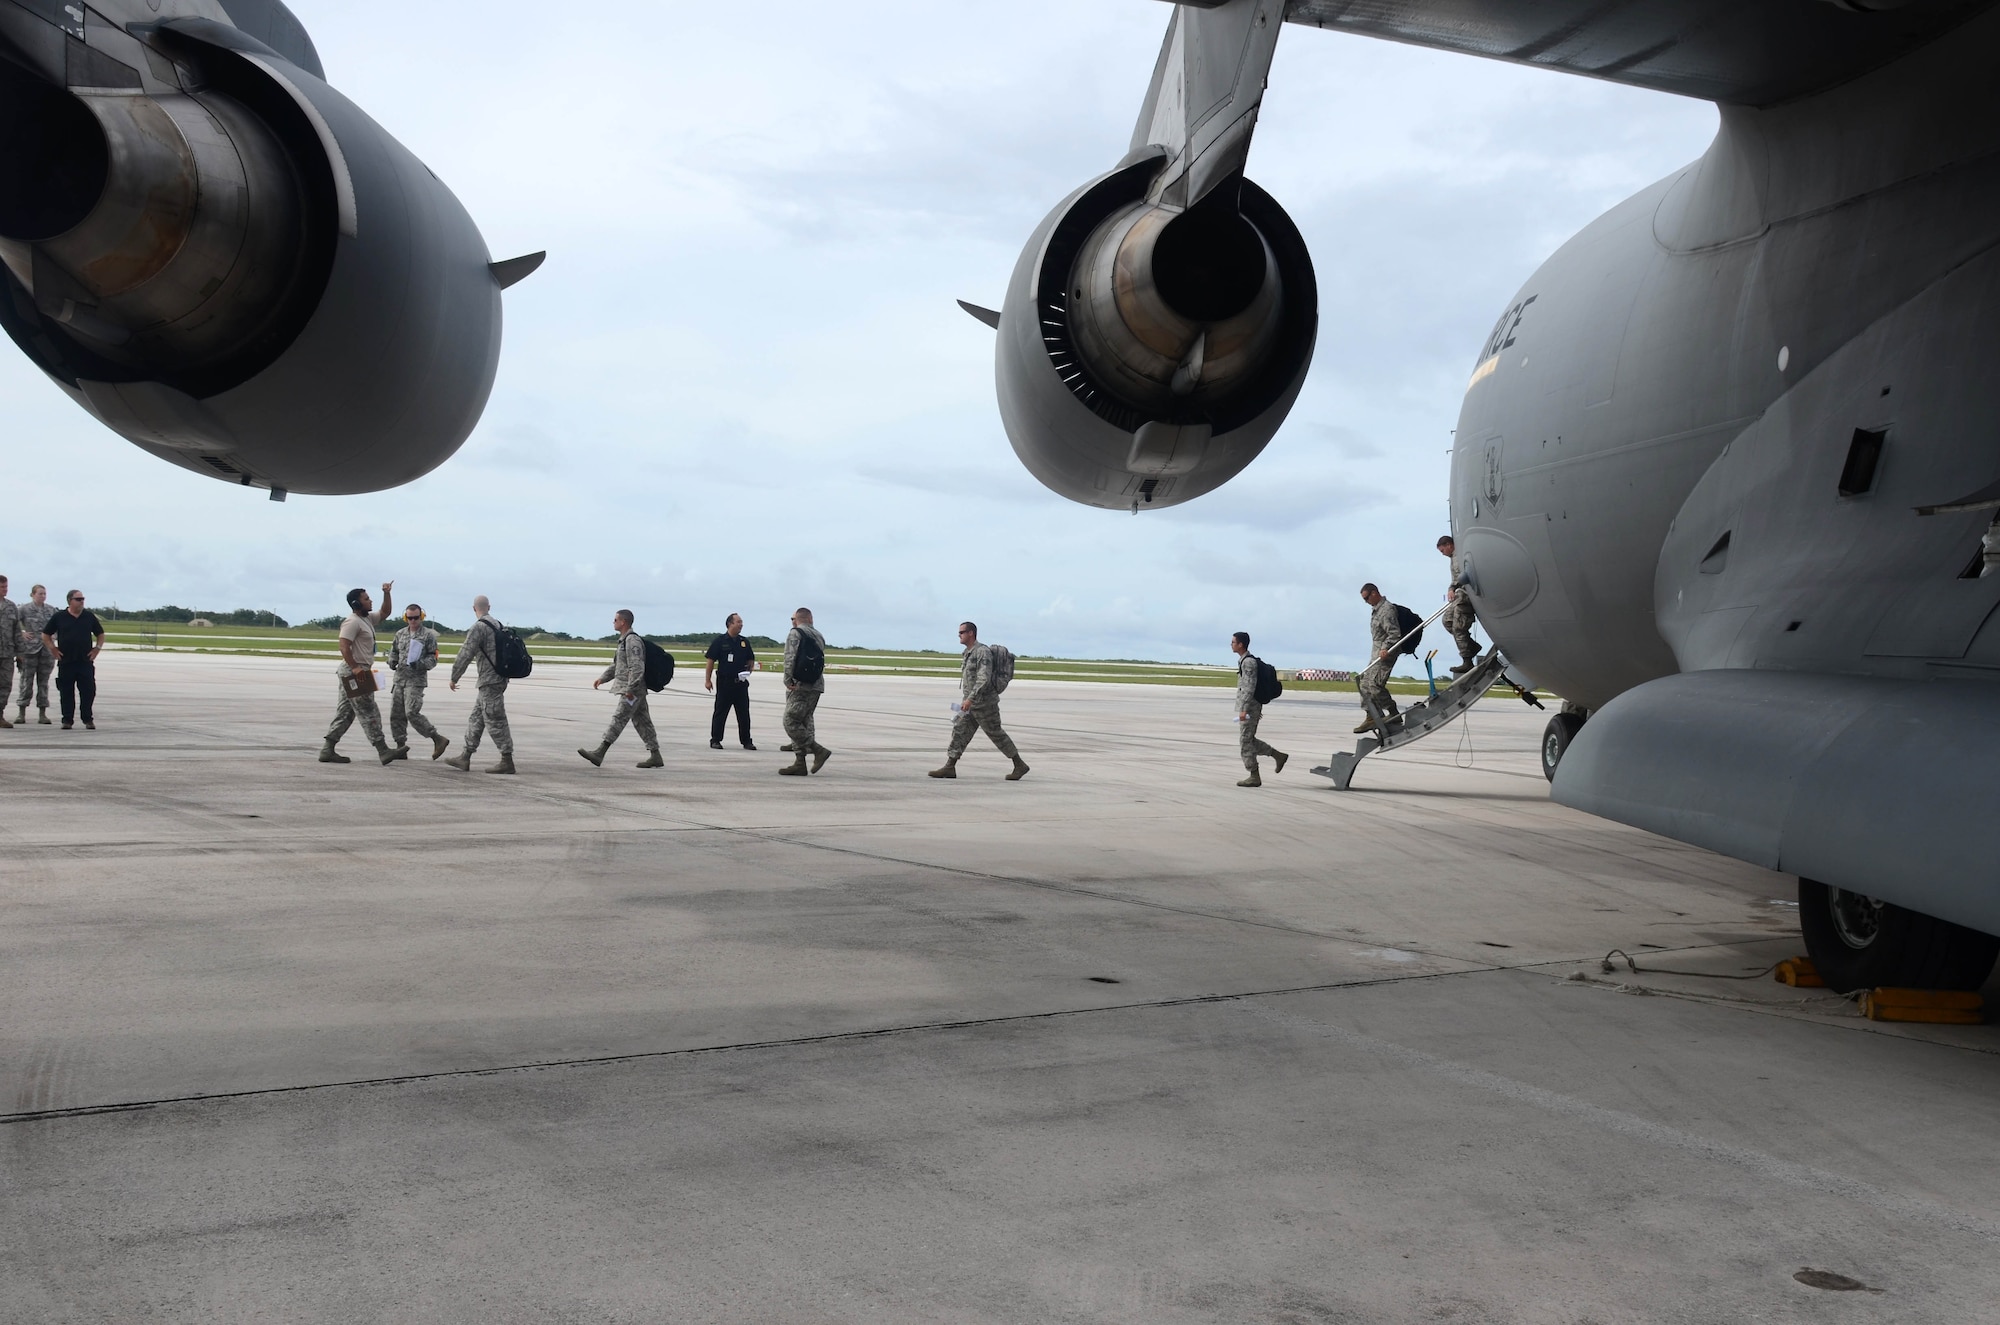 More than 125 Department of Defense members and contractors arrive at Andersen Air Force Base, Guam, July 15, 2015, after evacuation from Wake Island in preparation for potential surges caused by Typhoon Halola. An evacuation mission such as this highlights Pacific Air Forces flexibility to generate air response quickly across the theater, which is a key component to air power. (U.S. Air Force photo by Airman 1st Class Alexa A. Henderson/Released)